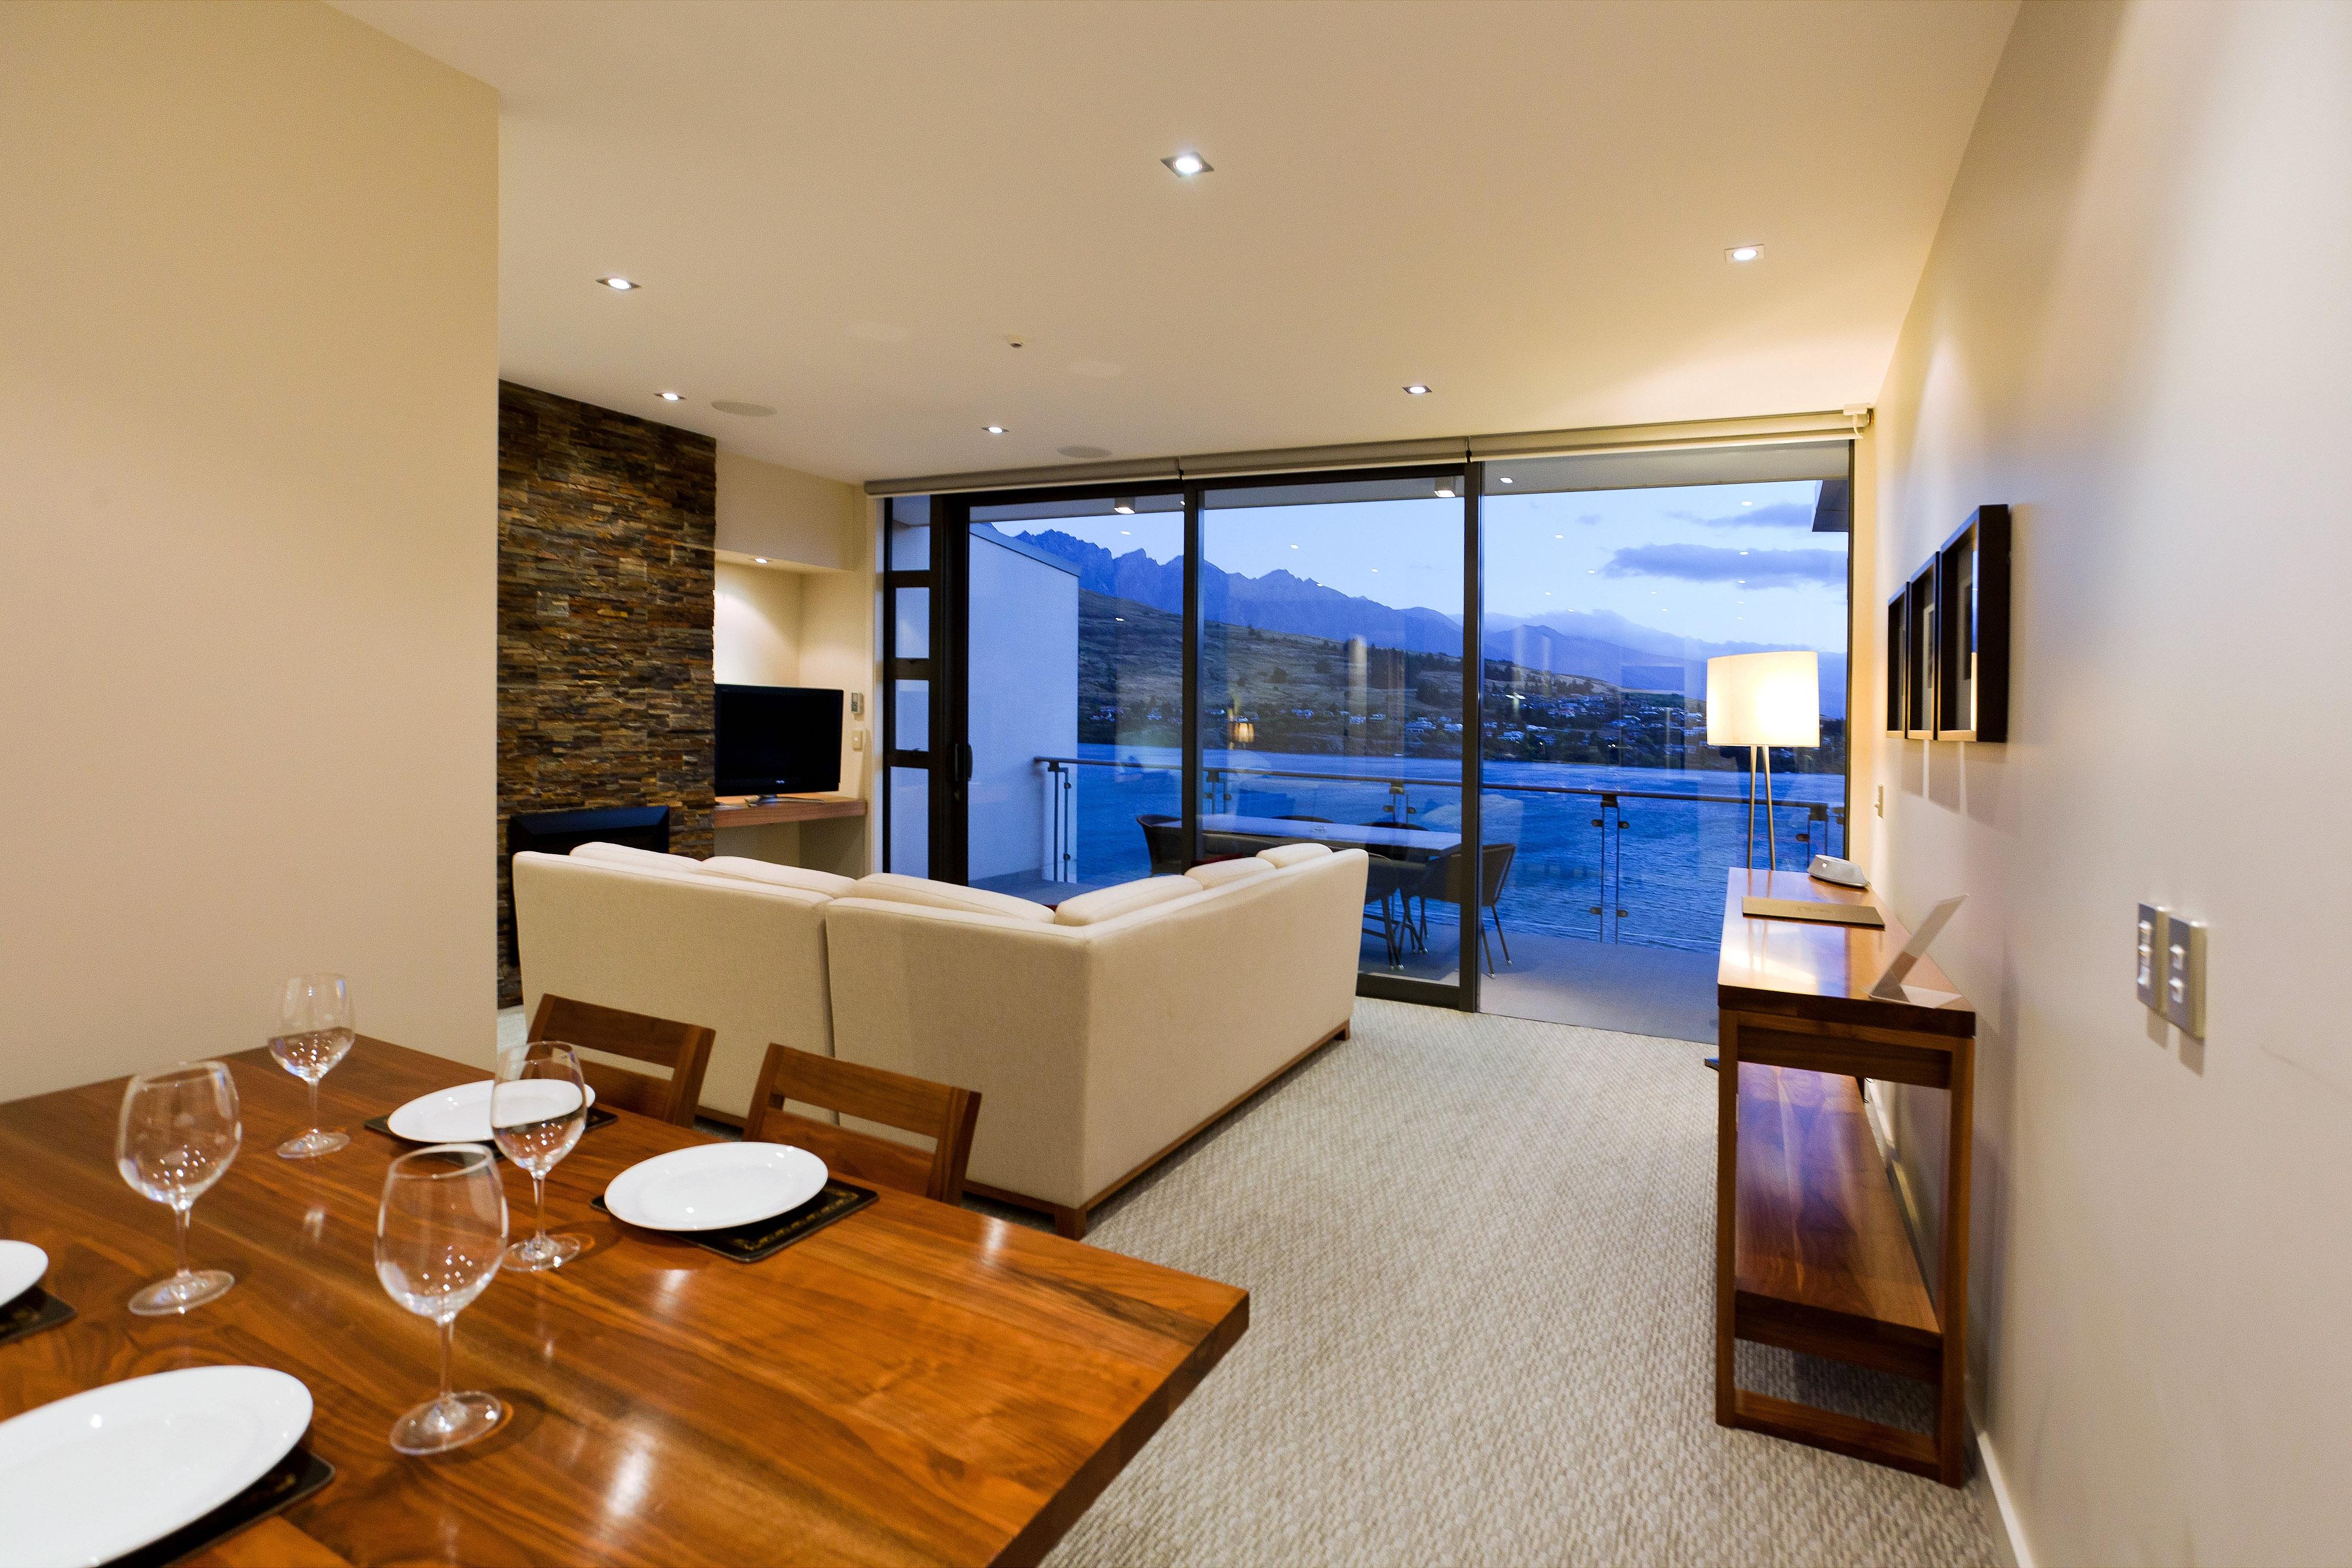 The Rees Hotel & Luxury Apartments Queenstown Exterior photo